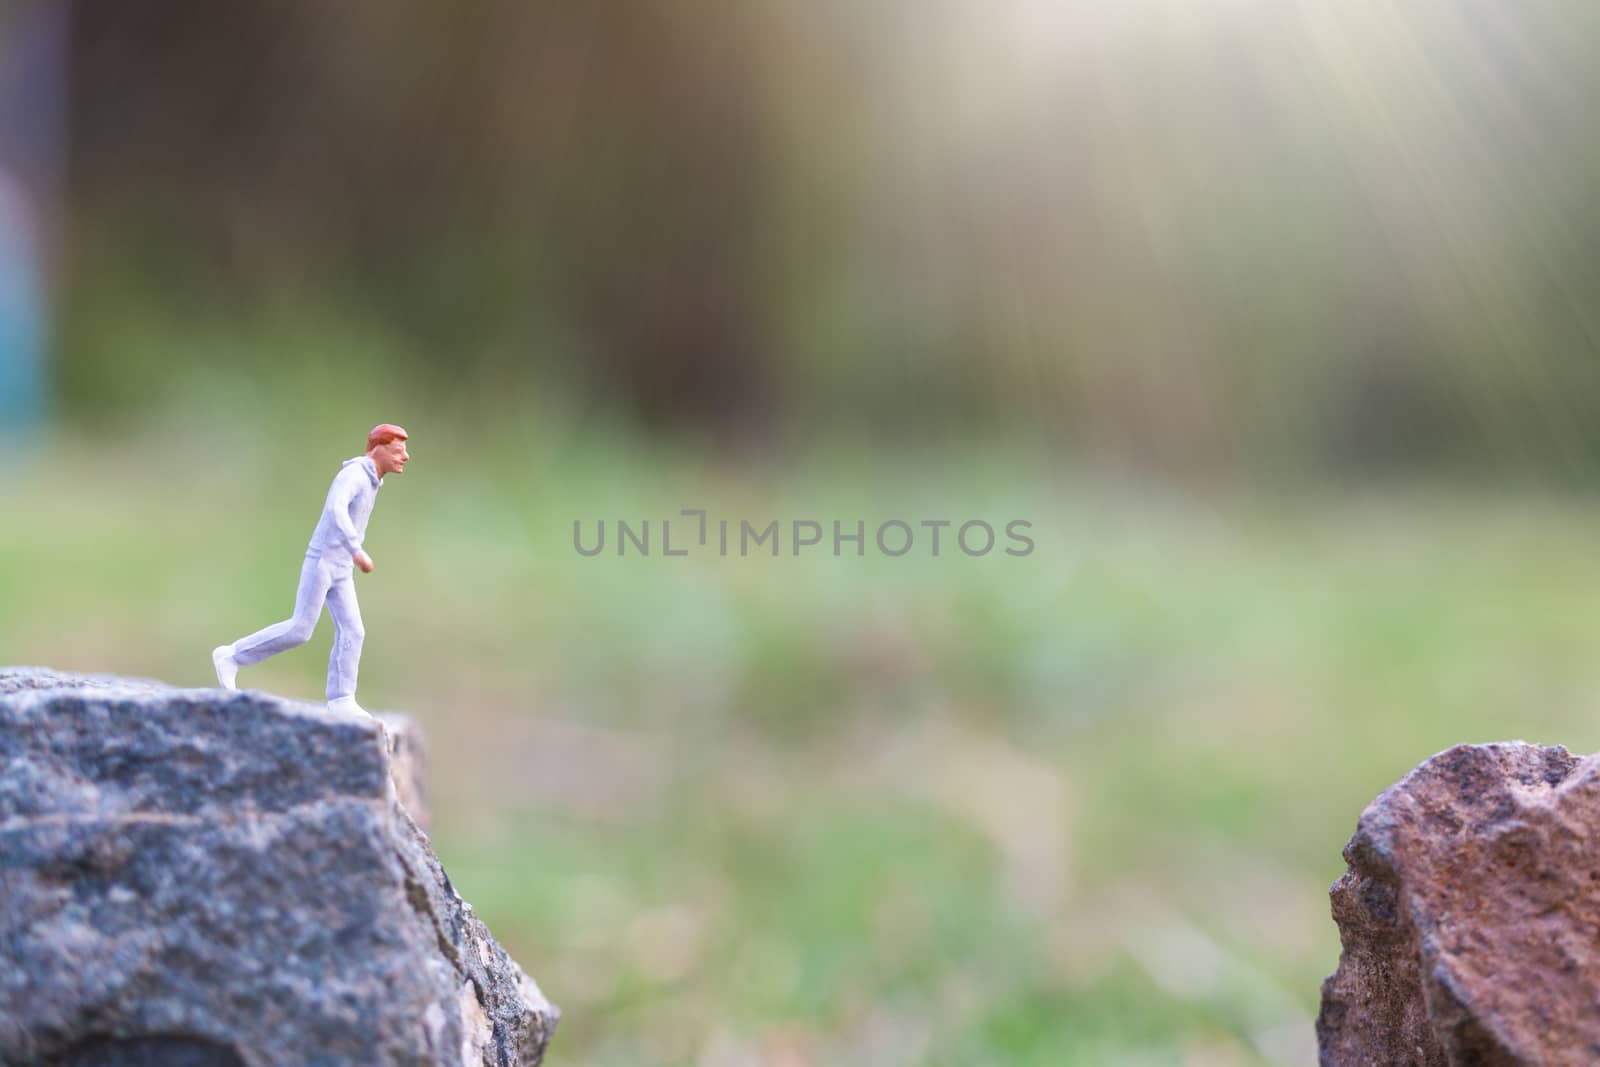 Miniature people : Running on rock cliff with nature background , Health And lifestyle concepts